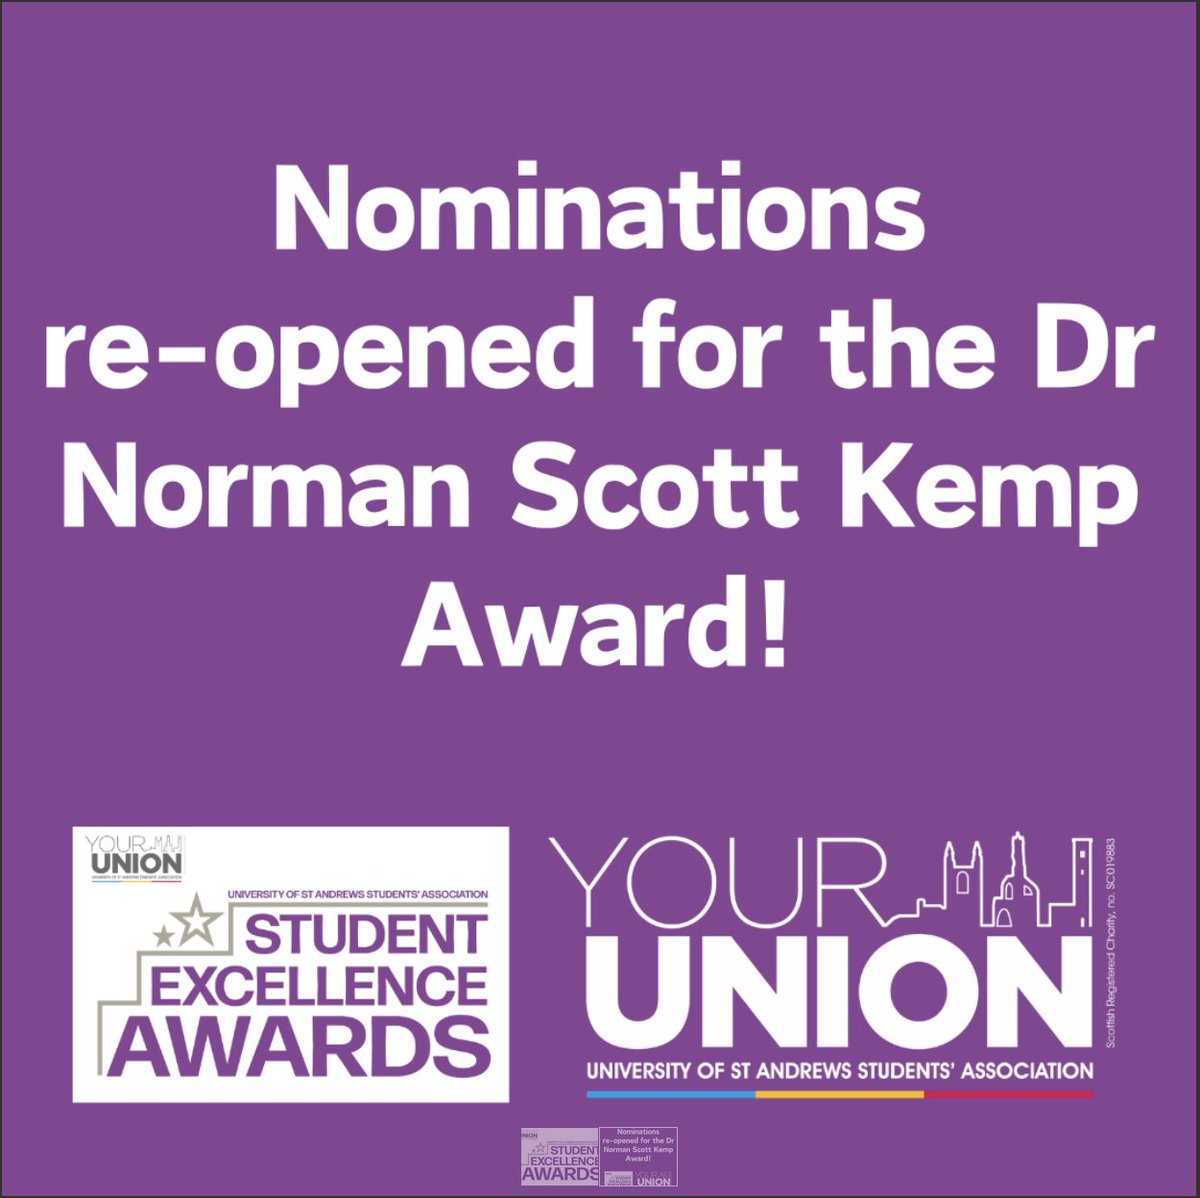 The Dr. Norman Scott Kemp Award is open until May 10th. The award is given to one student every year who makes an outstanding and exceptional contribution to PG student representation, activities or communities during their time at St Andrews. Link: ow.ly/yLBw50Ryh6I